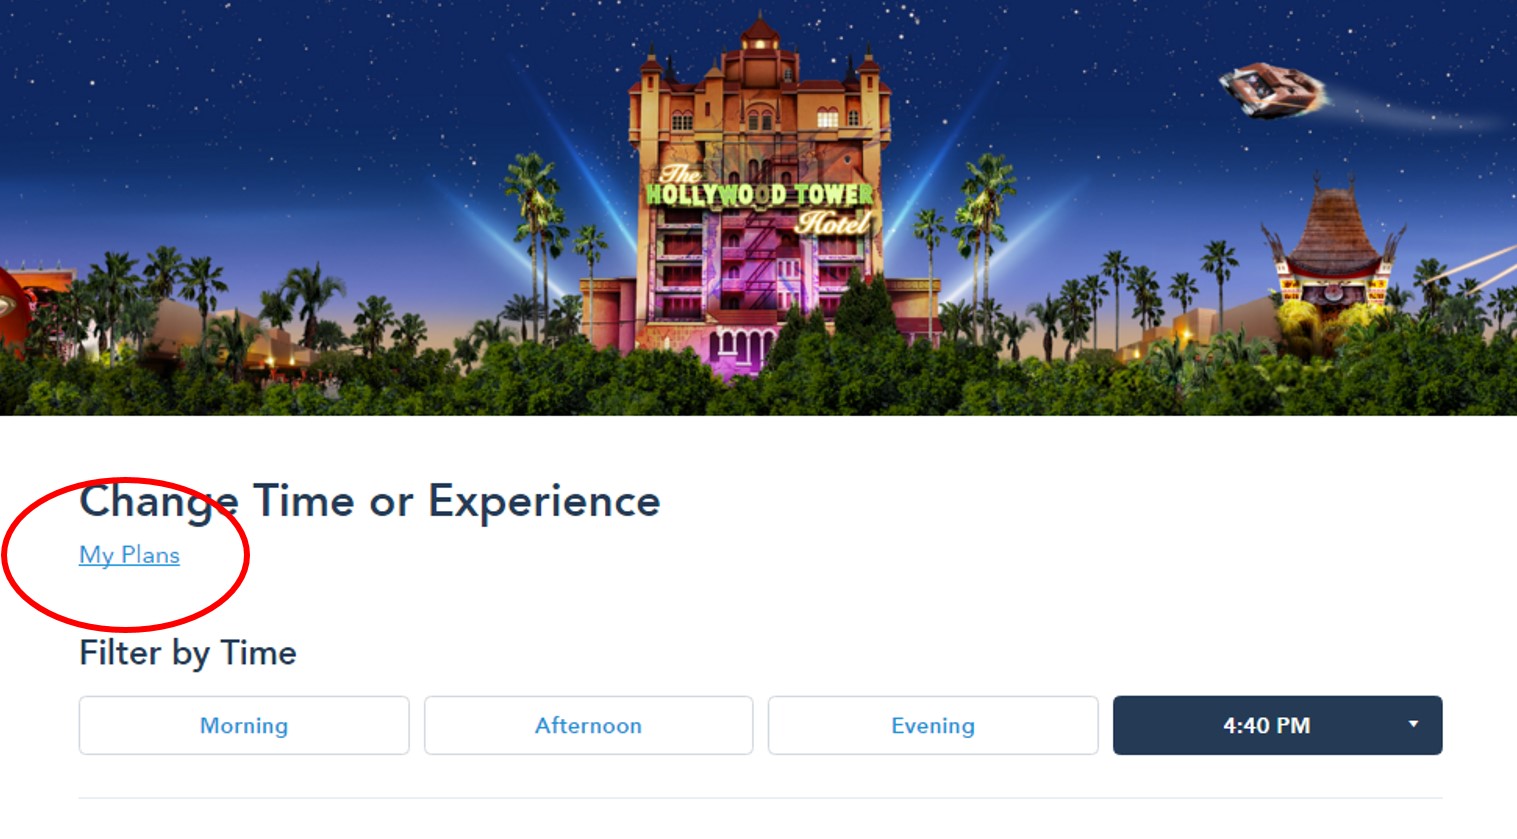 My Plans for FastPass+ from yourfirstvisit.net